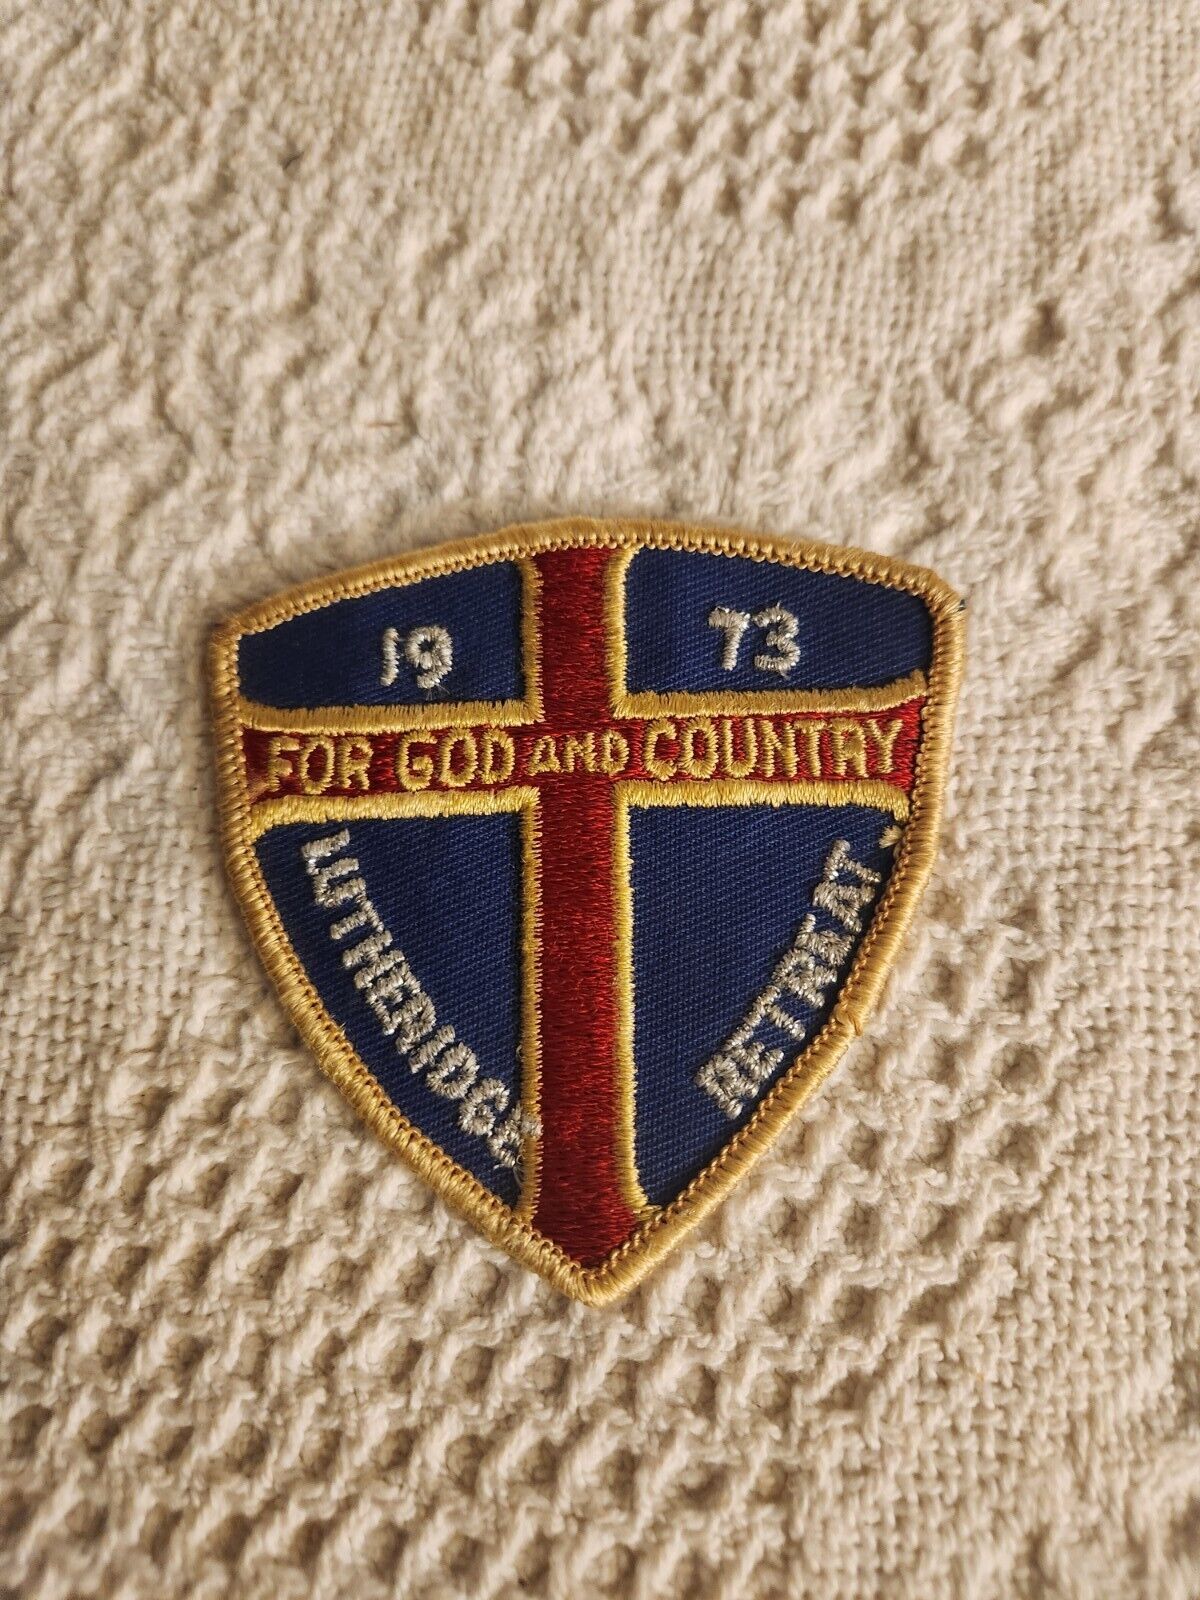 BSA 1973 For God And Country LUTHERIDGE RETREAT Embroidered Patch